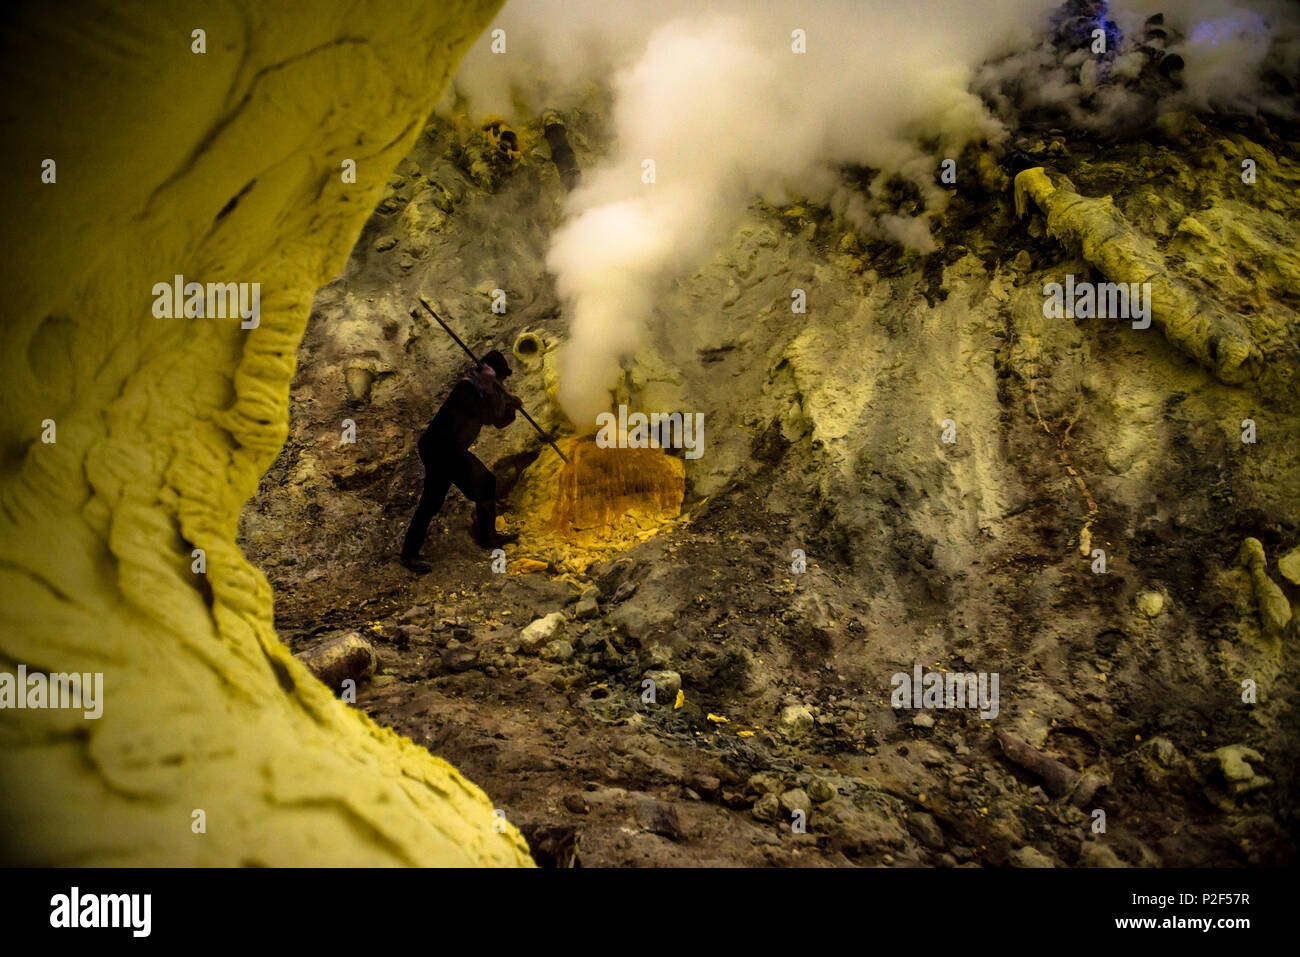 Miners with crowbars in the devil mine of Ijen volcano during sulfur mining - Indonesia, Java Stock Photo